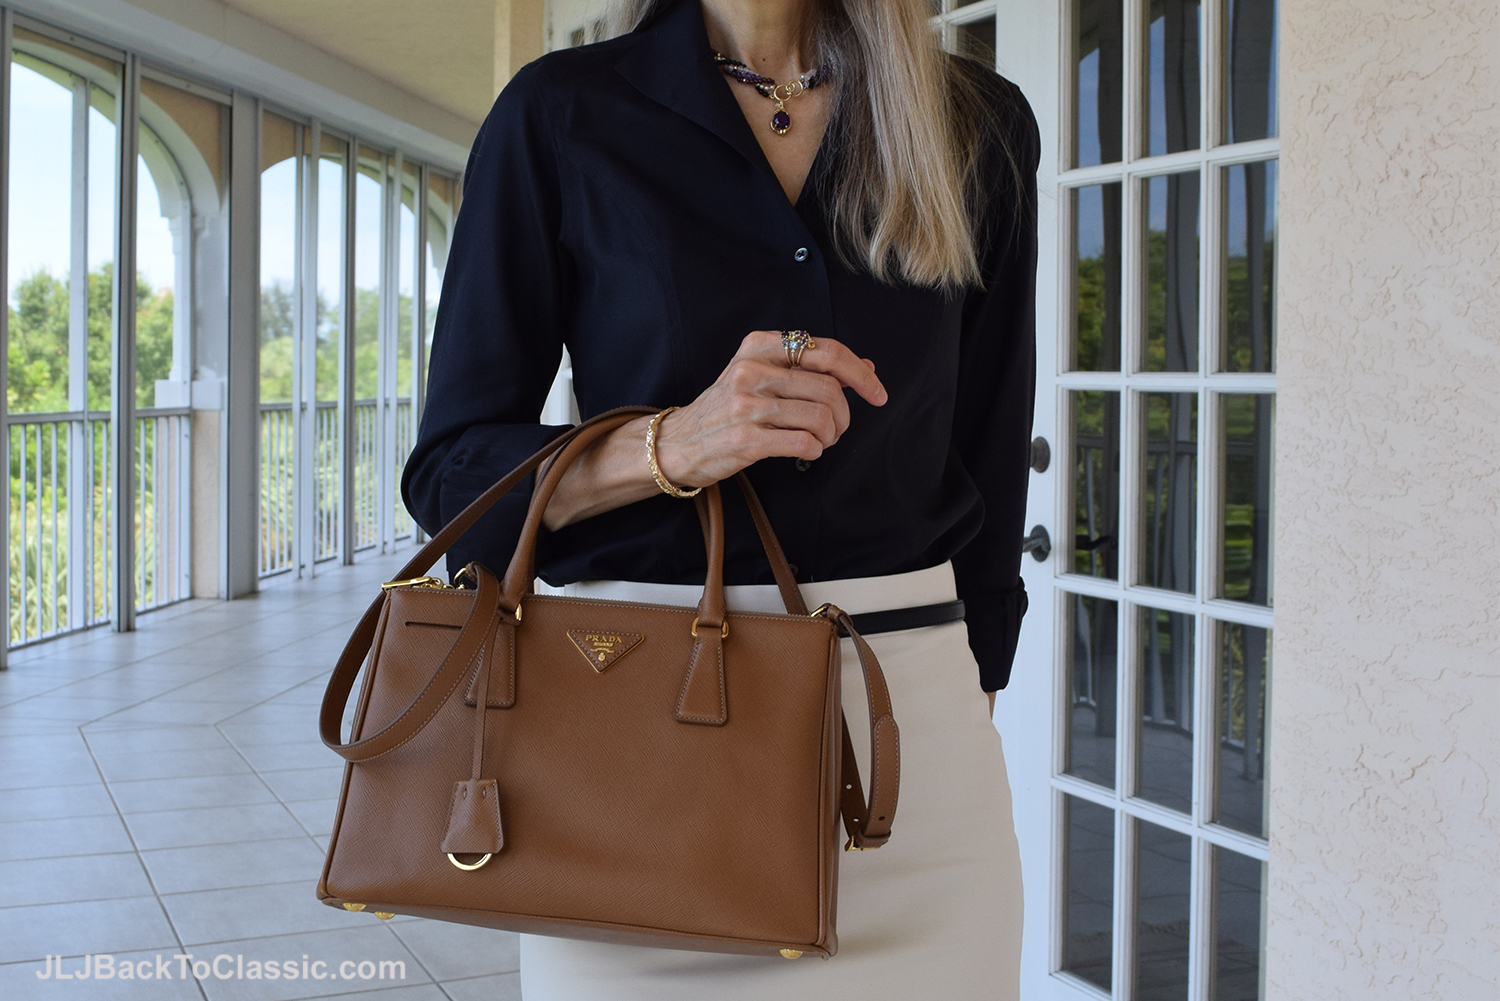 Black Button-Up Shirt, Ivory Pencil Skirt, and Cognac Pumps and